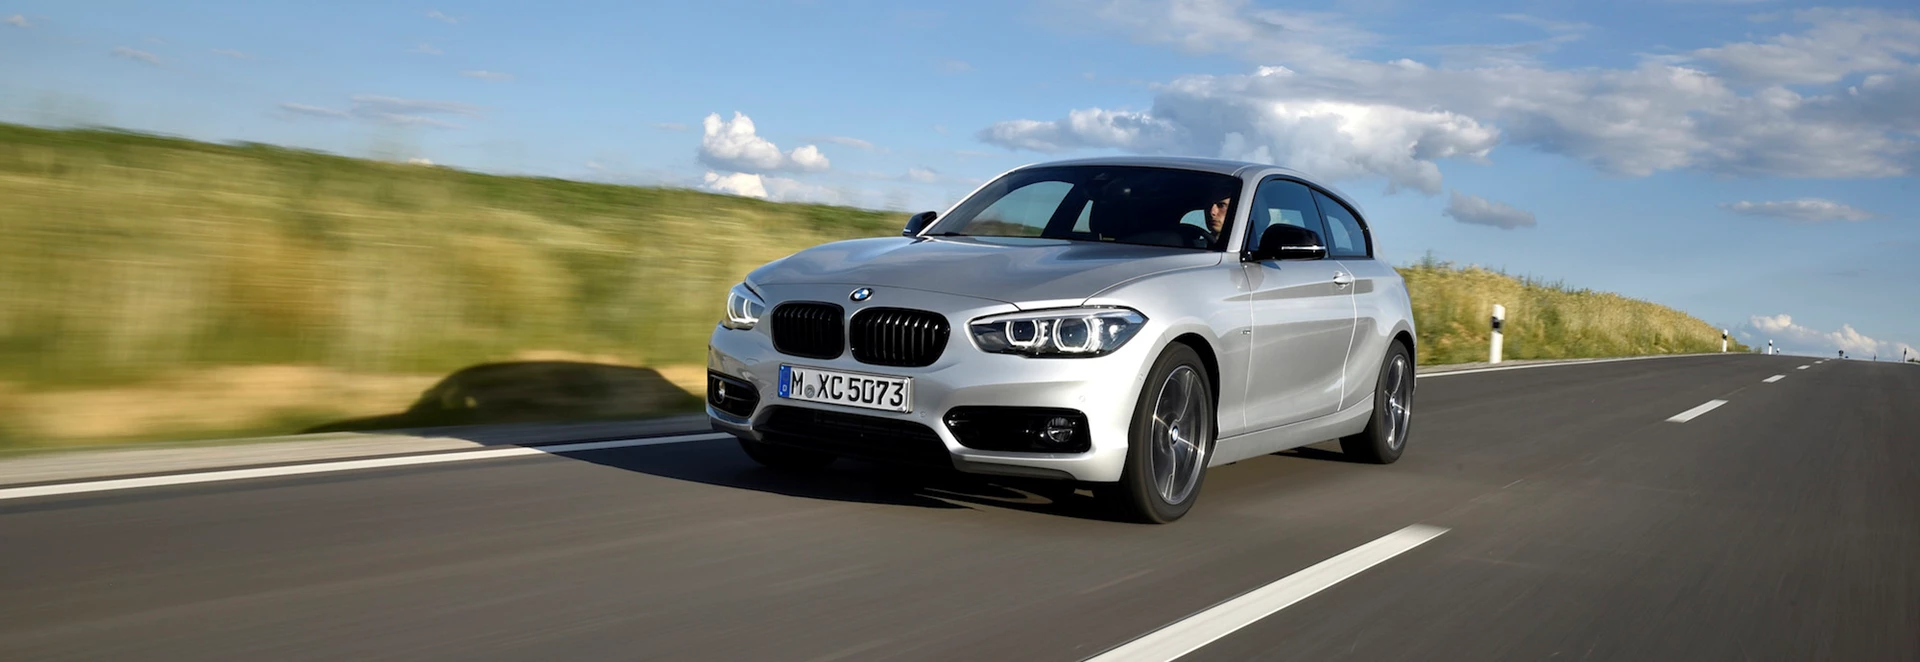 2018 BMW 1 Series review